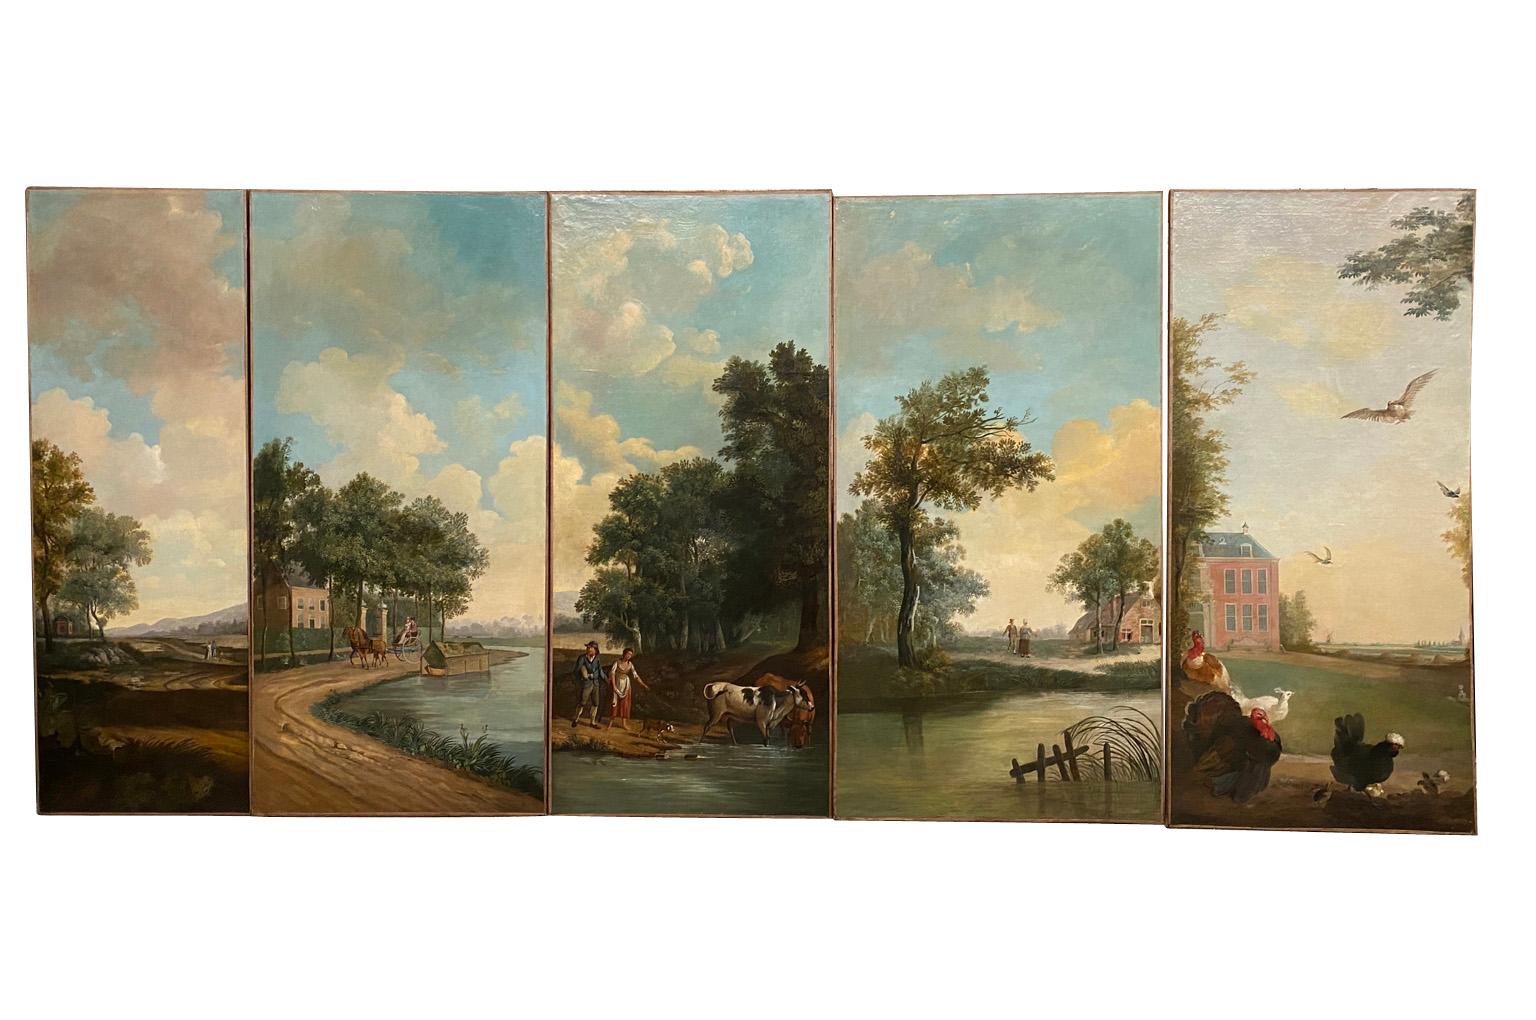 A fantastic and monumental set of 5 18th century Paintings from a chateau in Beziers, France.  Beautifully executed from oil on canvas.  These panels were imbedded in boiserie paneling in the chateau's salon.  The height of the panels is 93 1/2